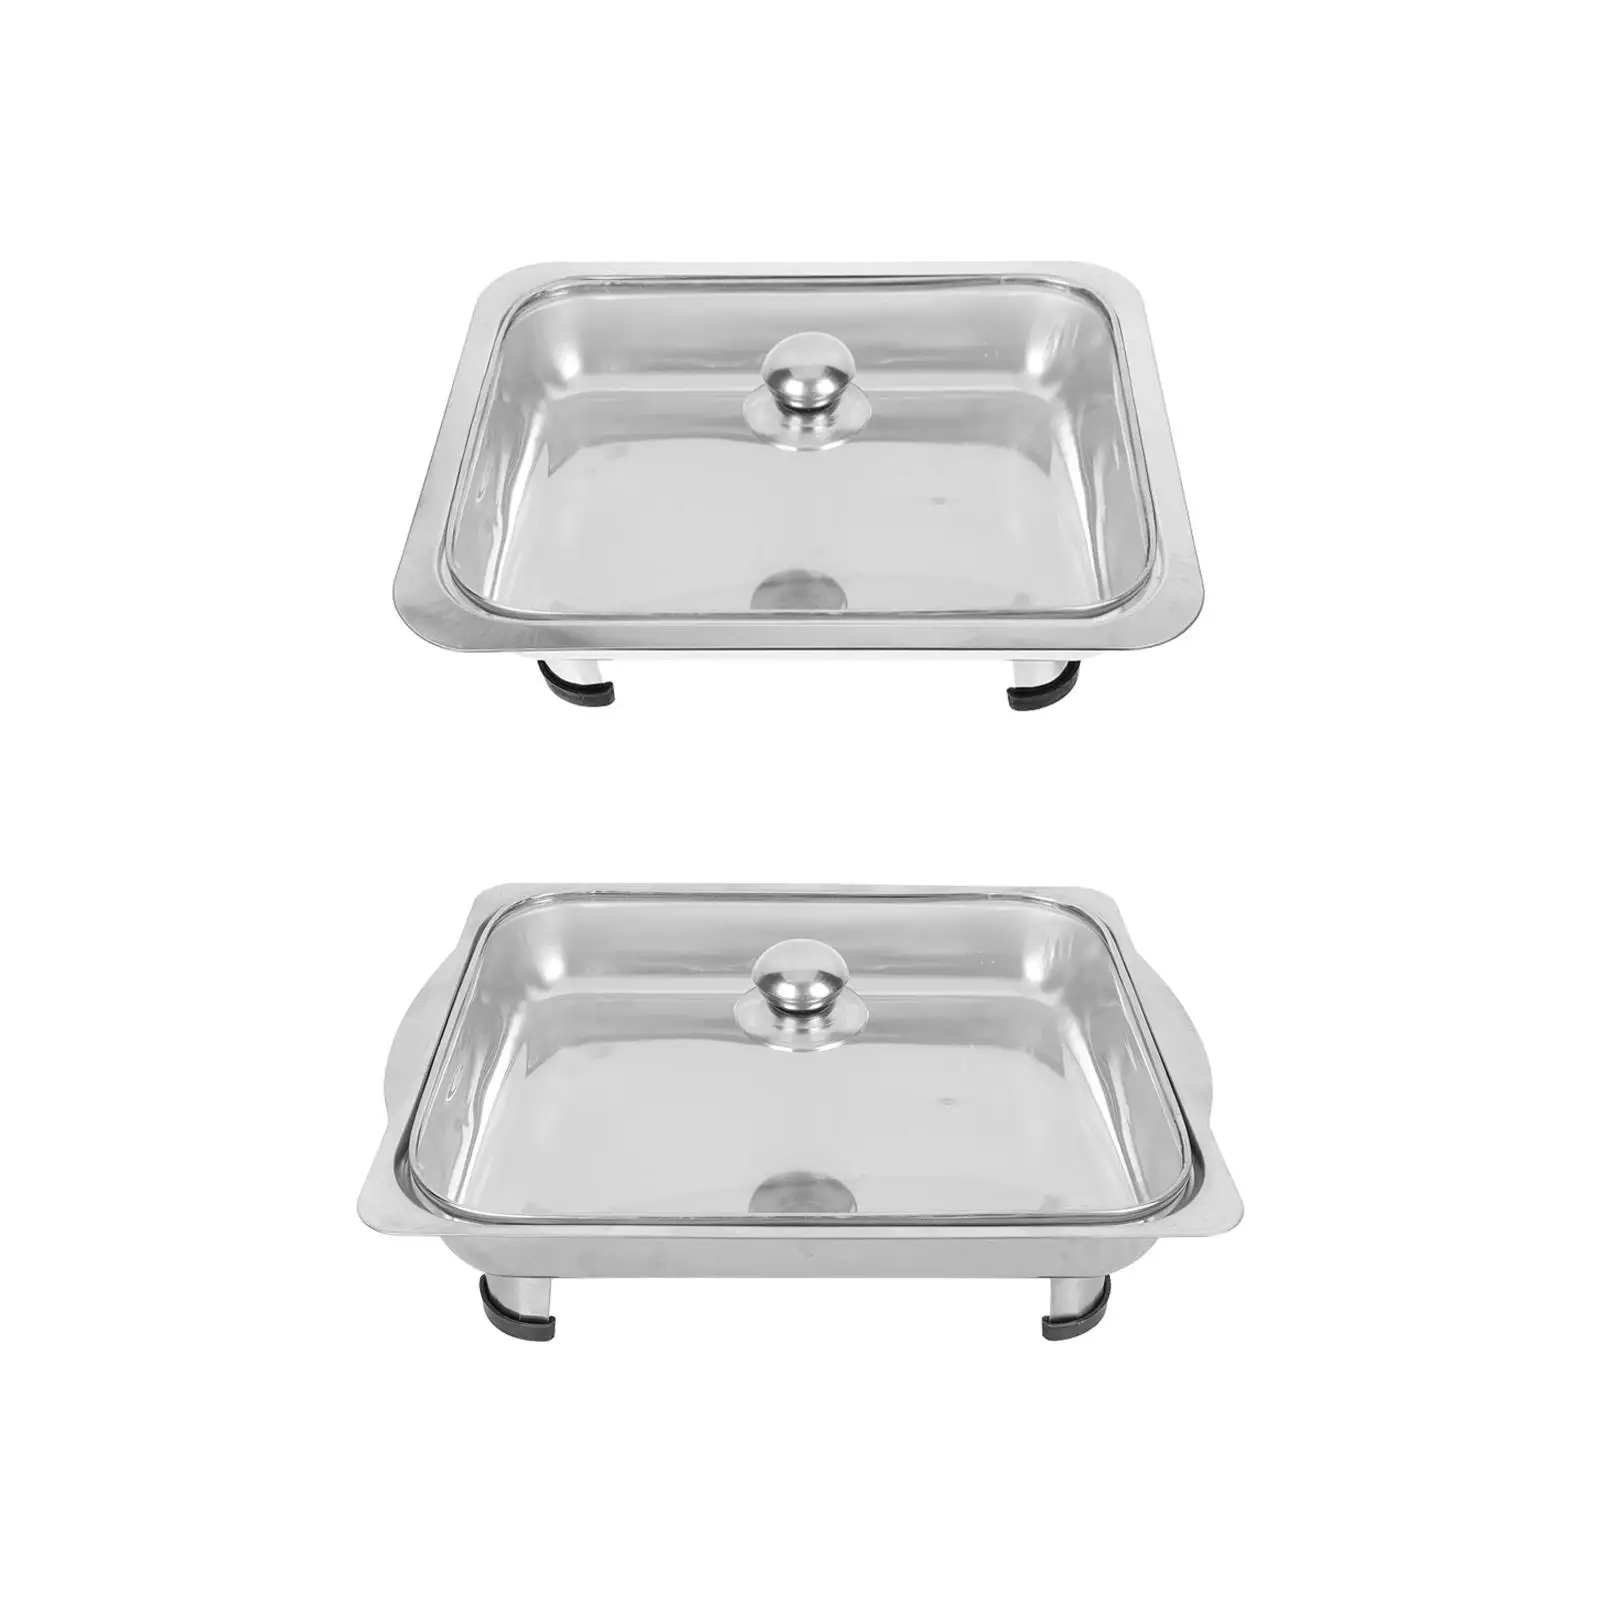 Buffet Dish Tray Buffet Server Warmer Easy to Clean Chafing Dish for Wedding Birthday Catering Events Holidays Parties